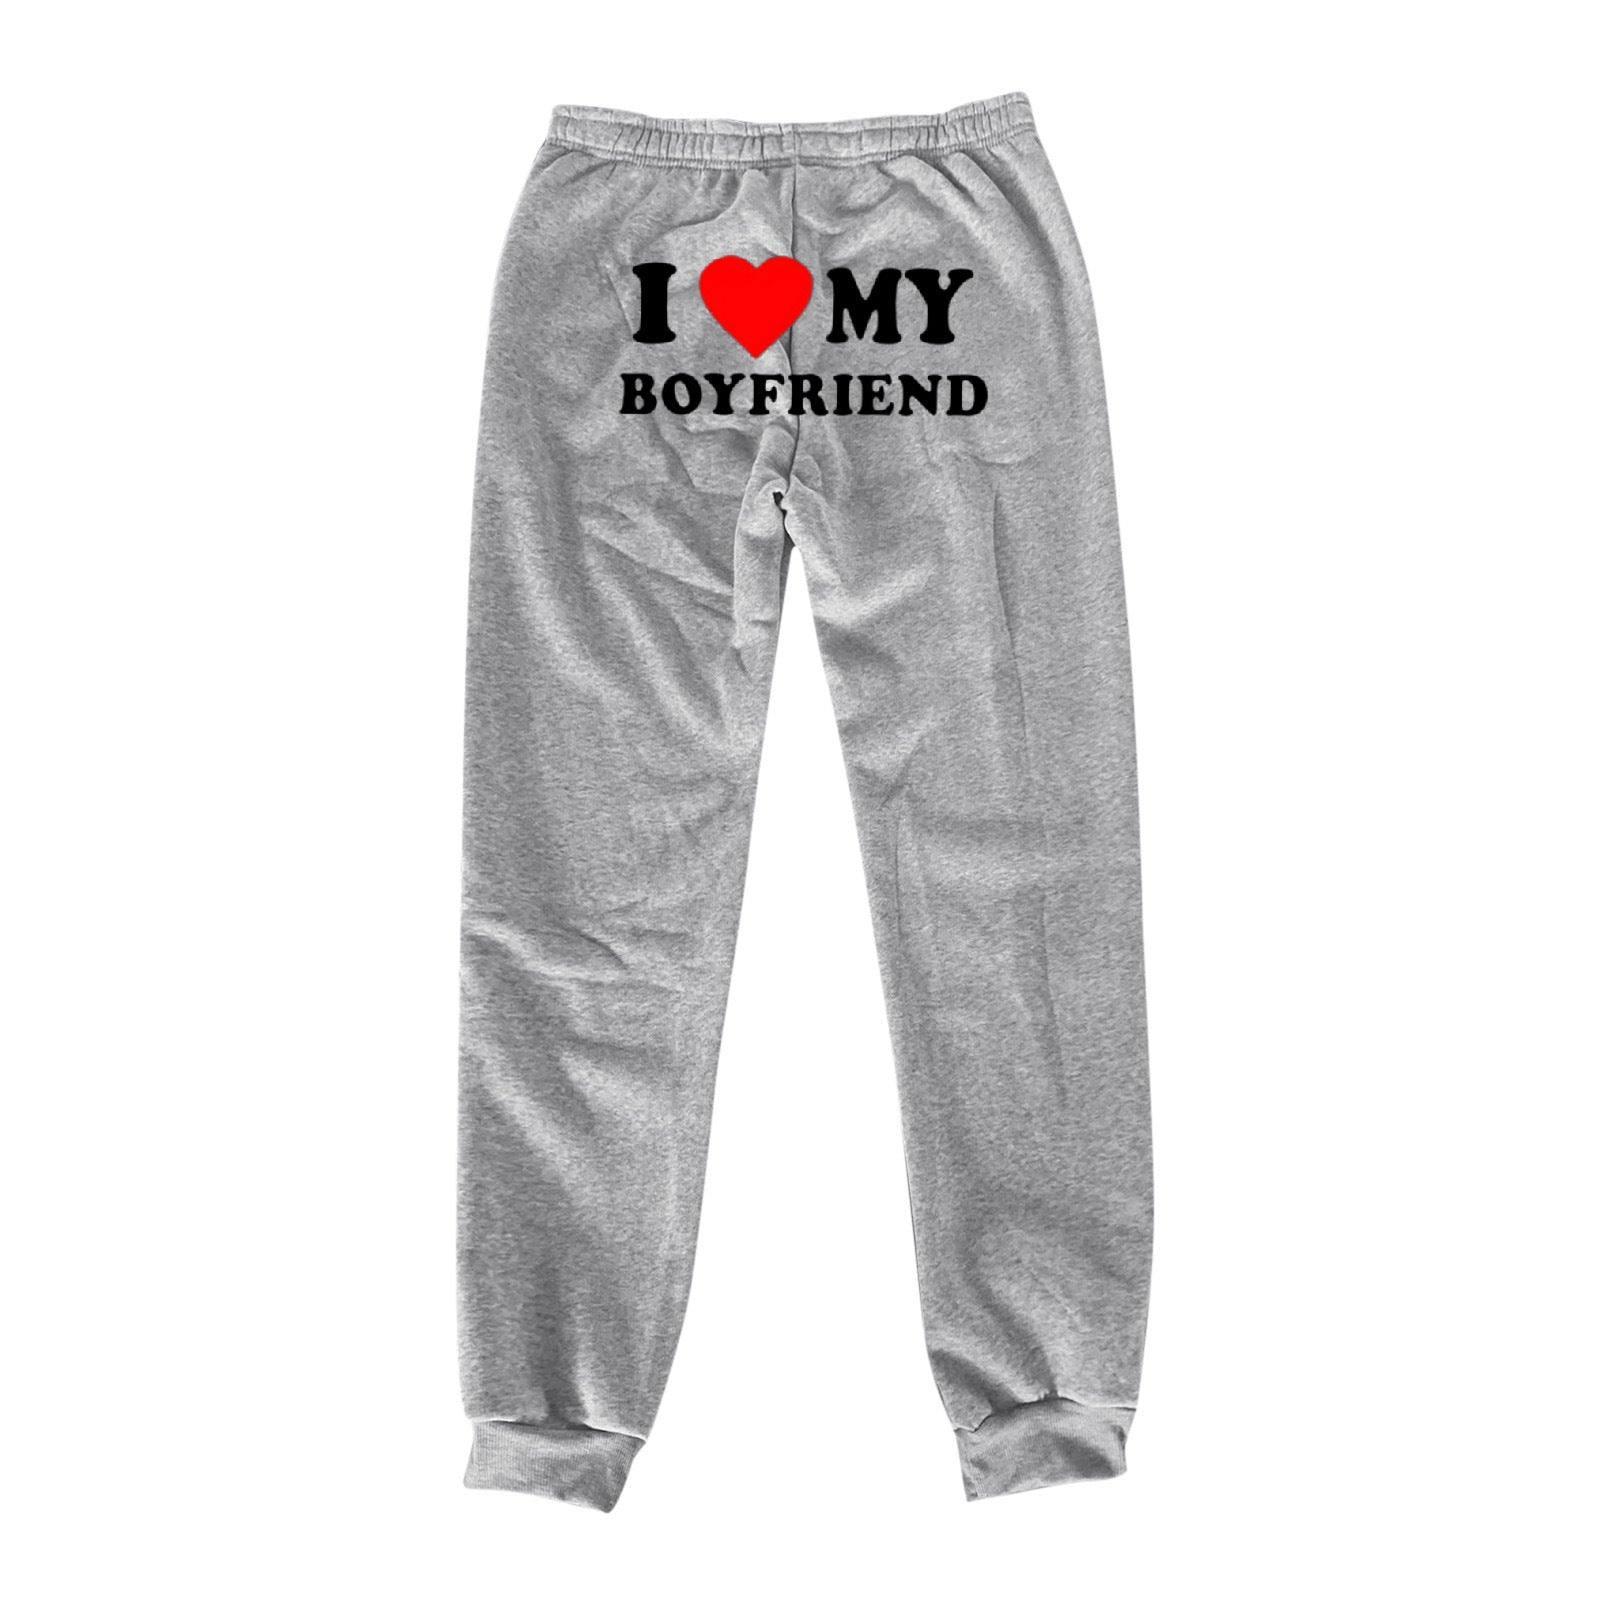 I Love MY BOYFRIEND Printed Trousers Casual Sweatpants Men-Light Gray Back Picture-9